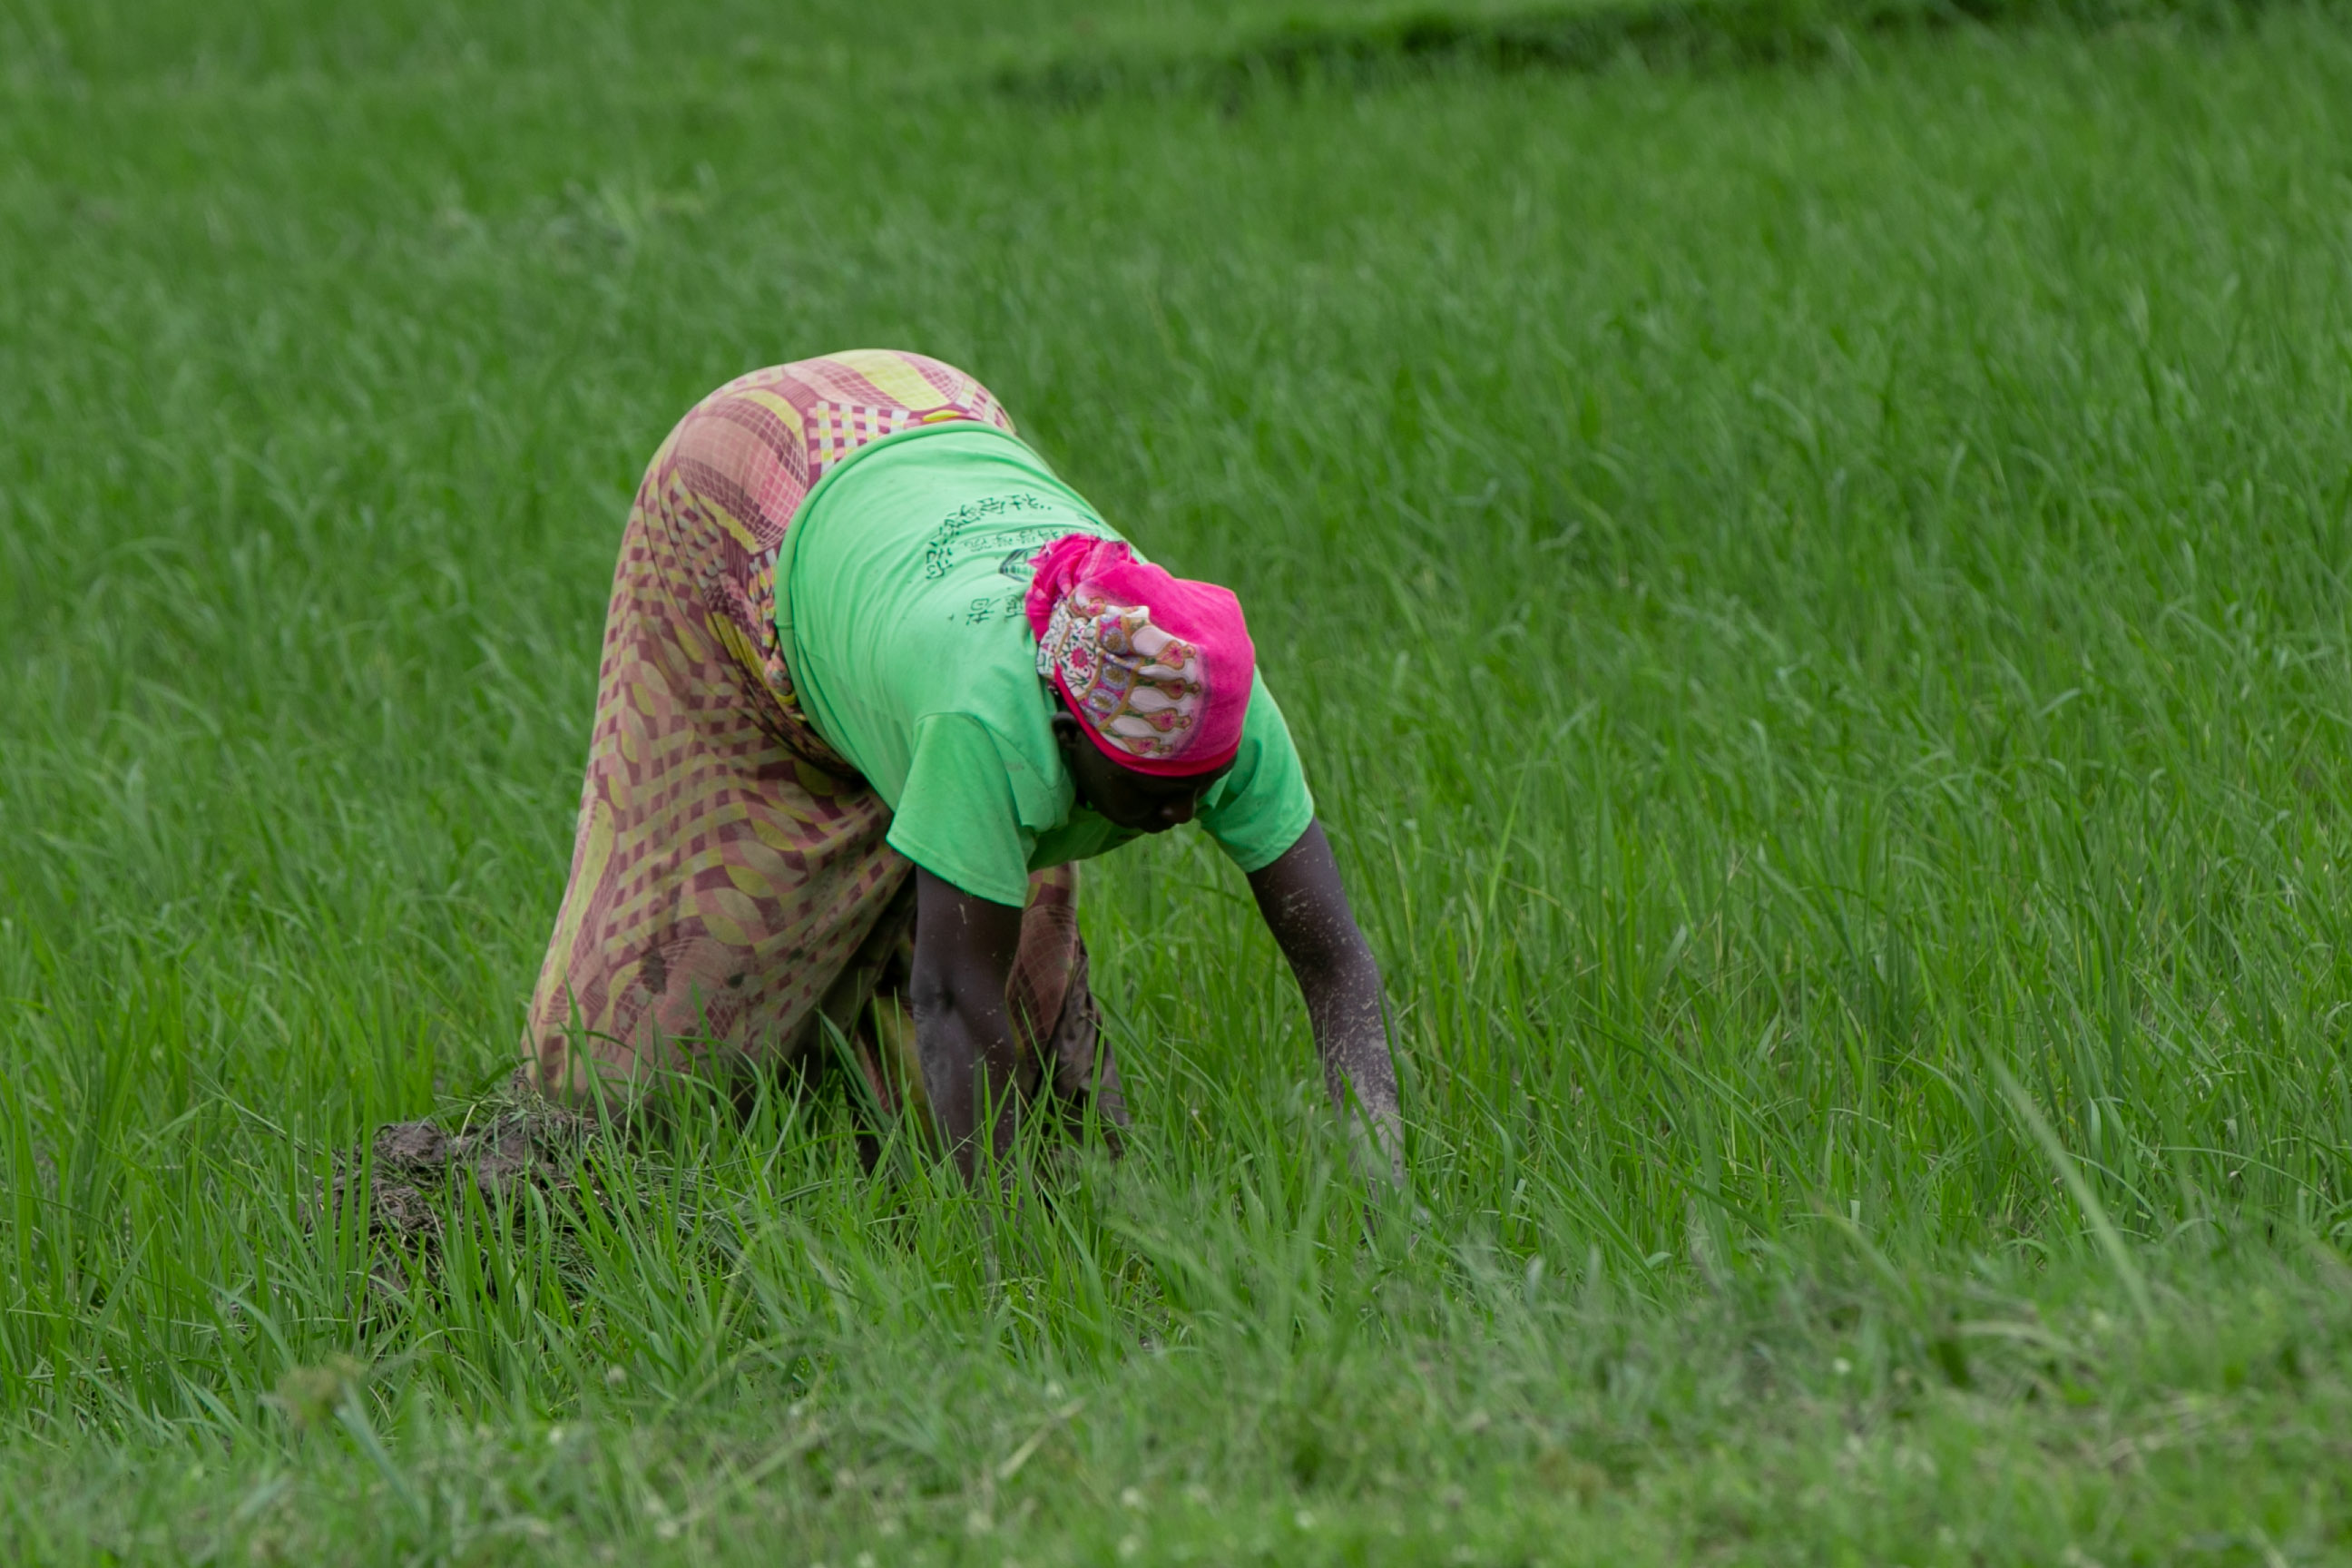 A woman working at her rice field in Karongi district. In Rwanda it is estimated that rural women spend at least 5 hours a day on unpaid care work compared to 1.5 hours for men.